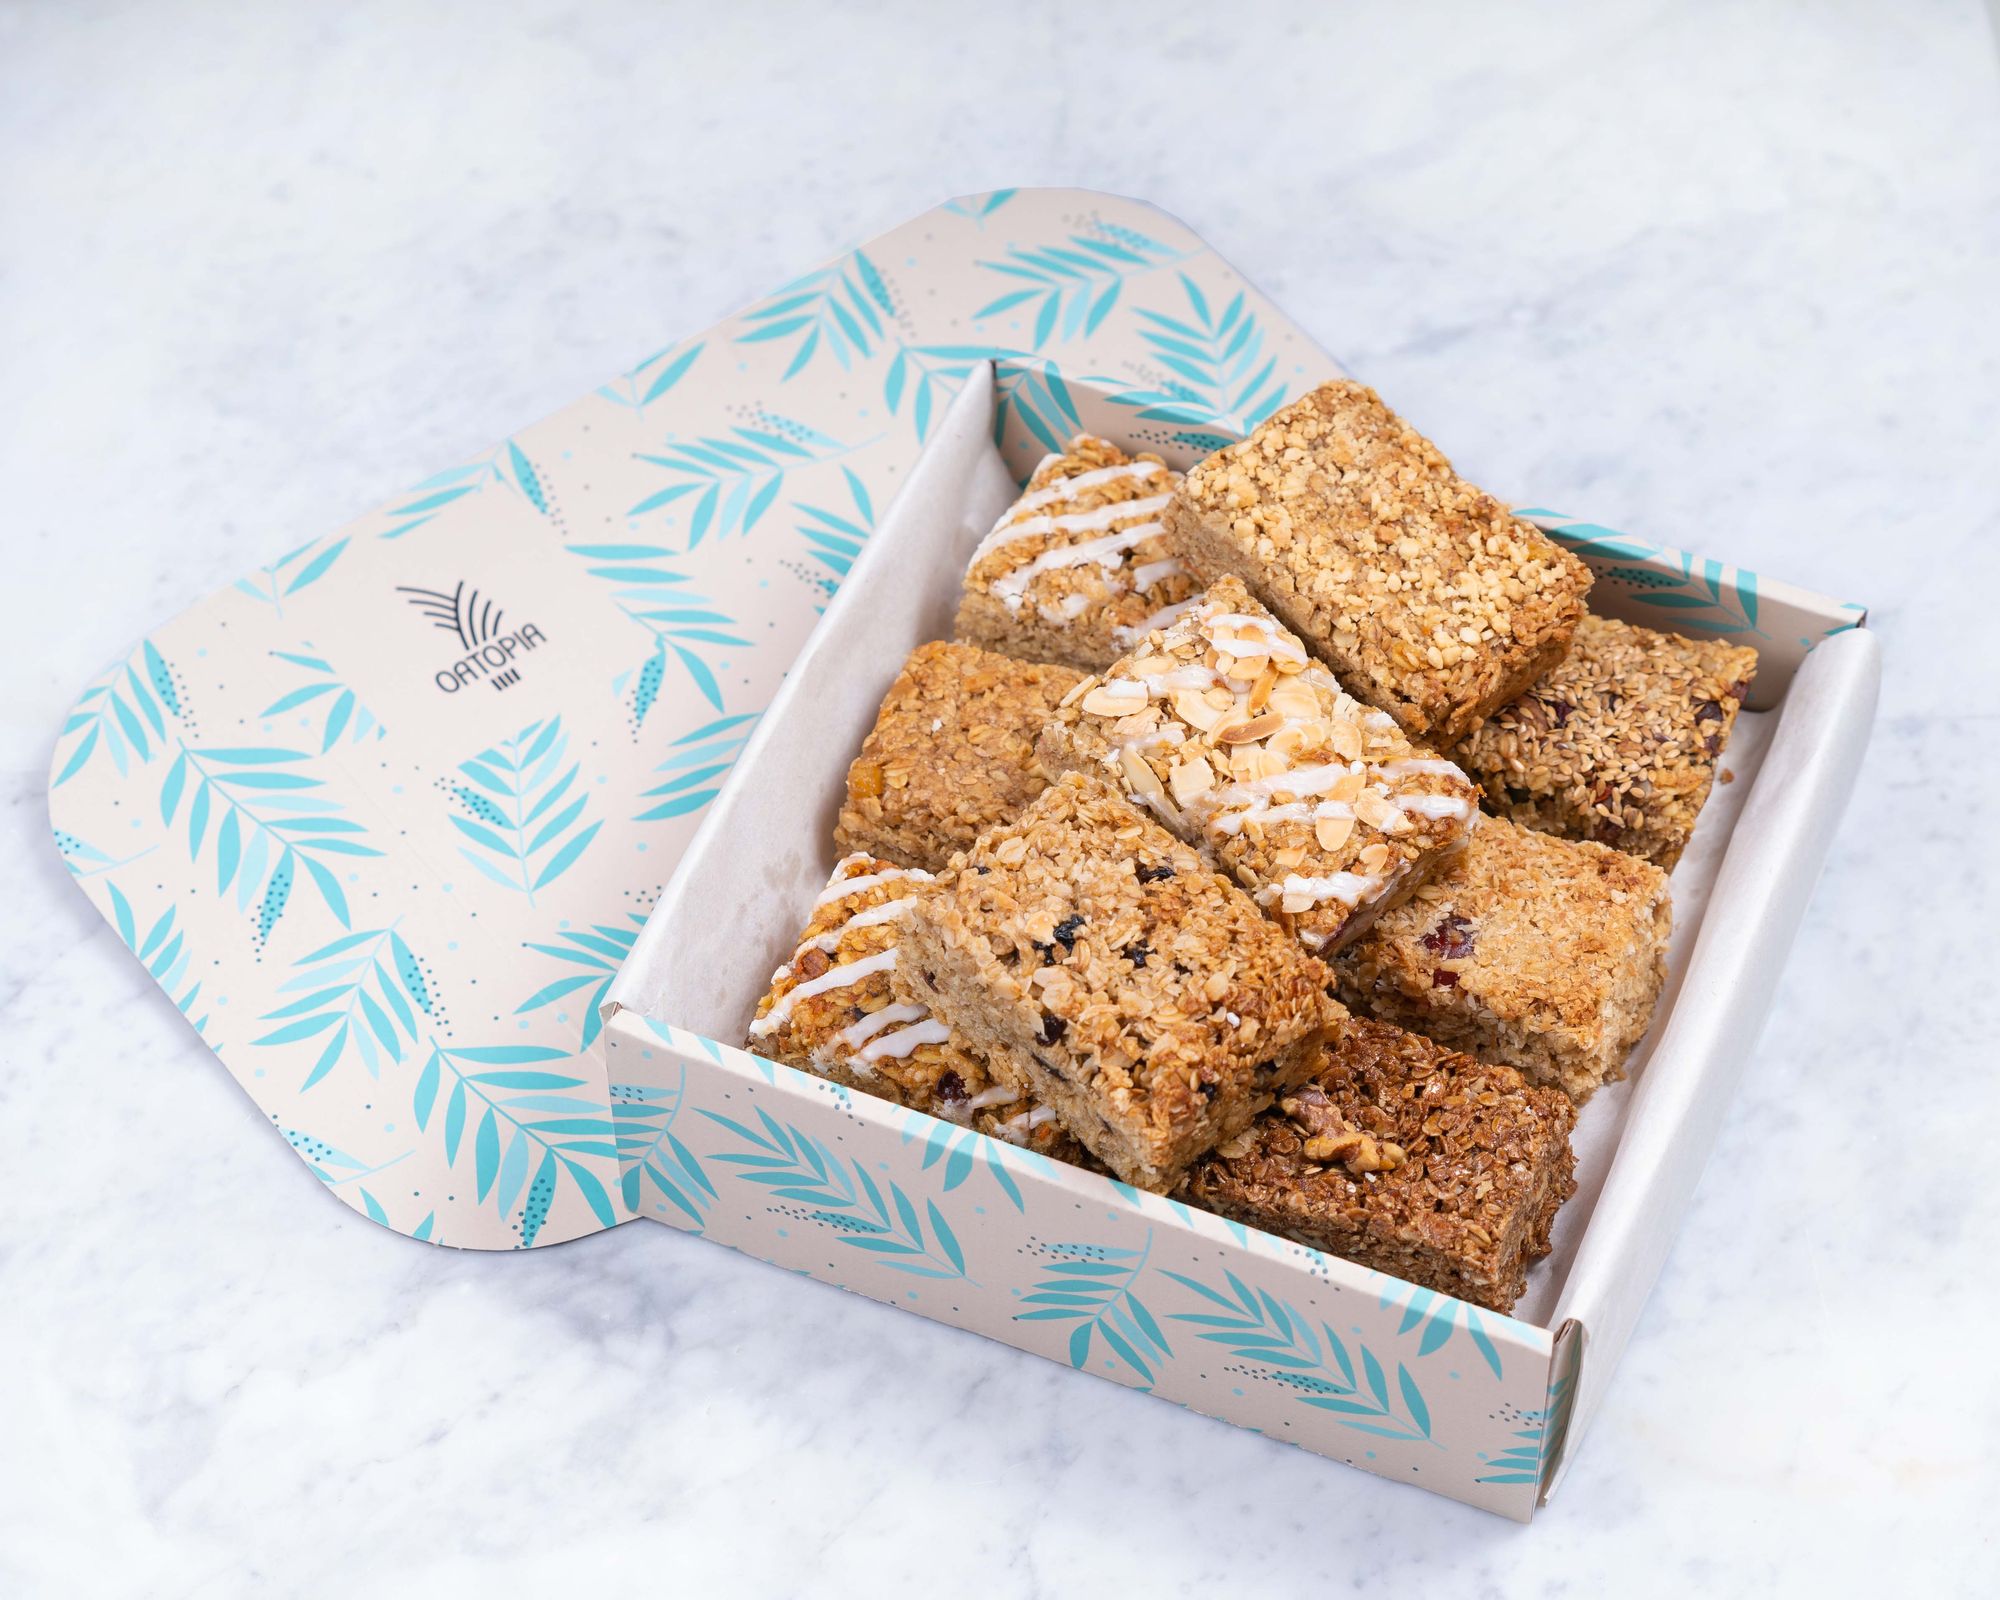 A bird’s eye view image of a branded Oatopia box full of oat-based flapjacks. There are different varieties with frosting, berries, nuts, and other ingredients in them. 